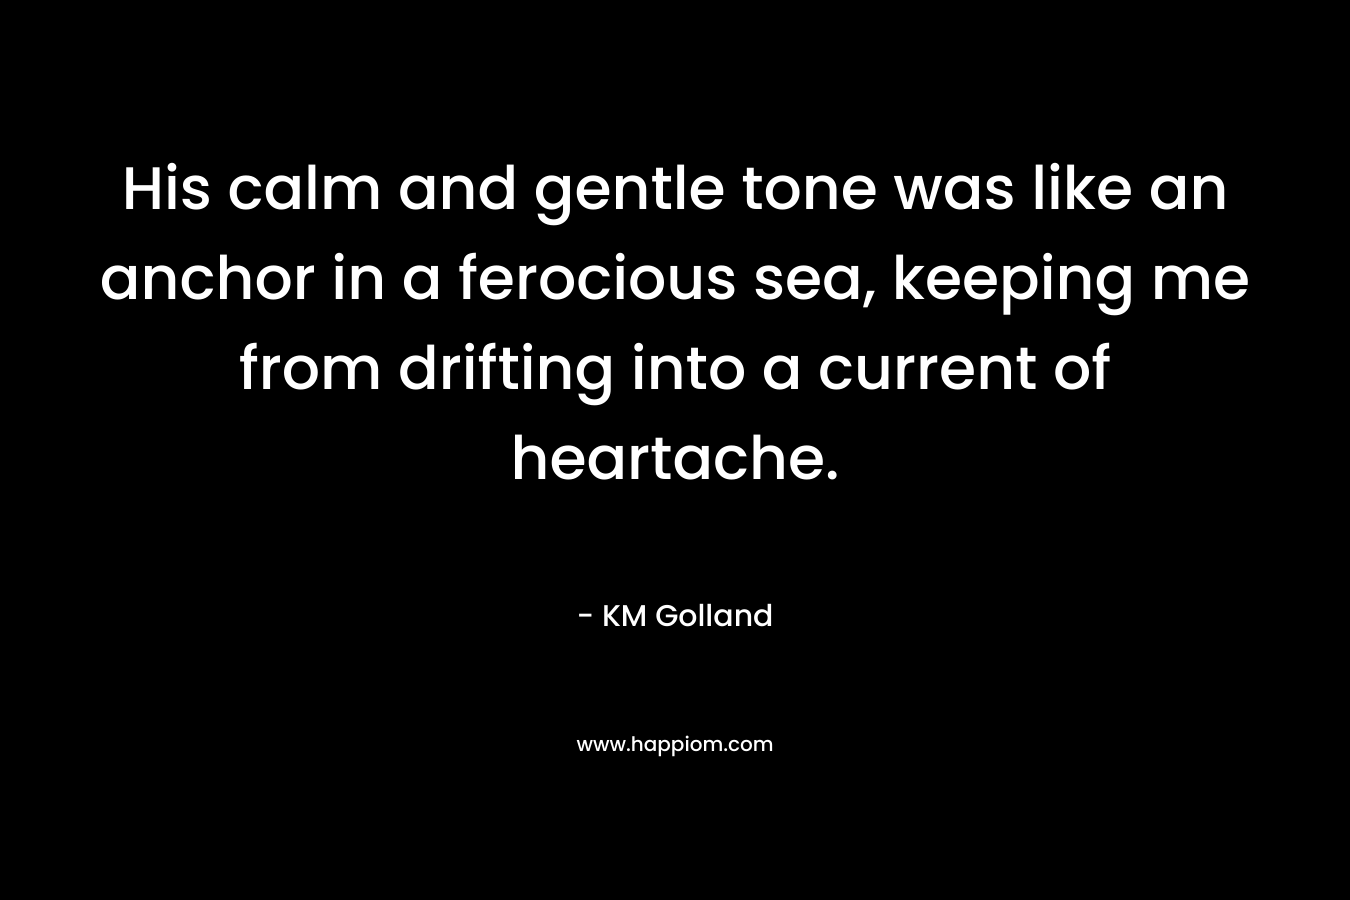 His calm and gentle tone was like an anchor in a ferocious sea, keeping me from drifting into a current of heartache.